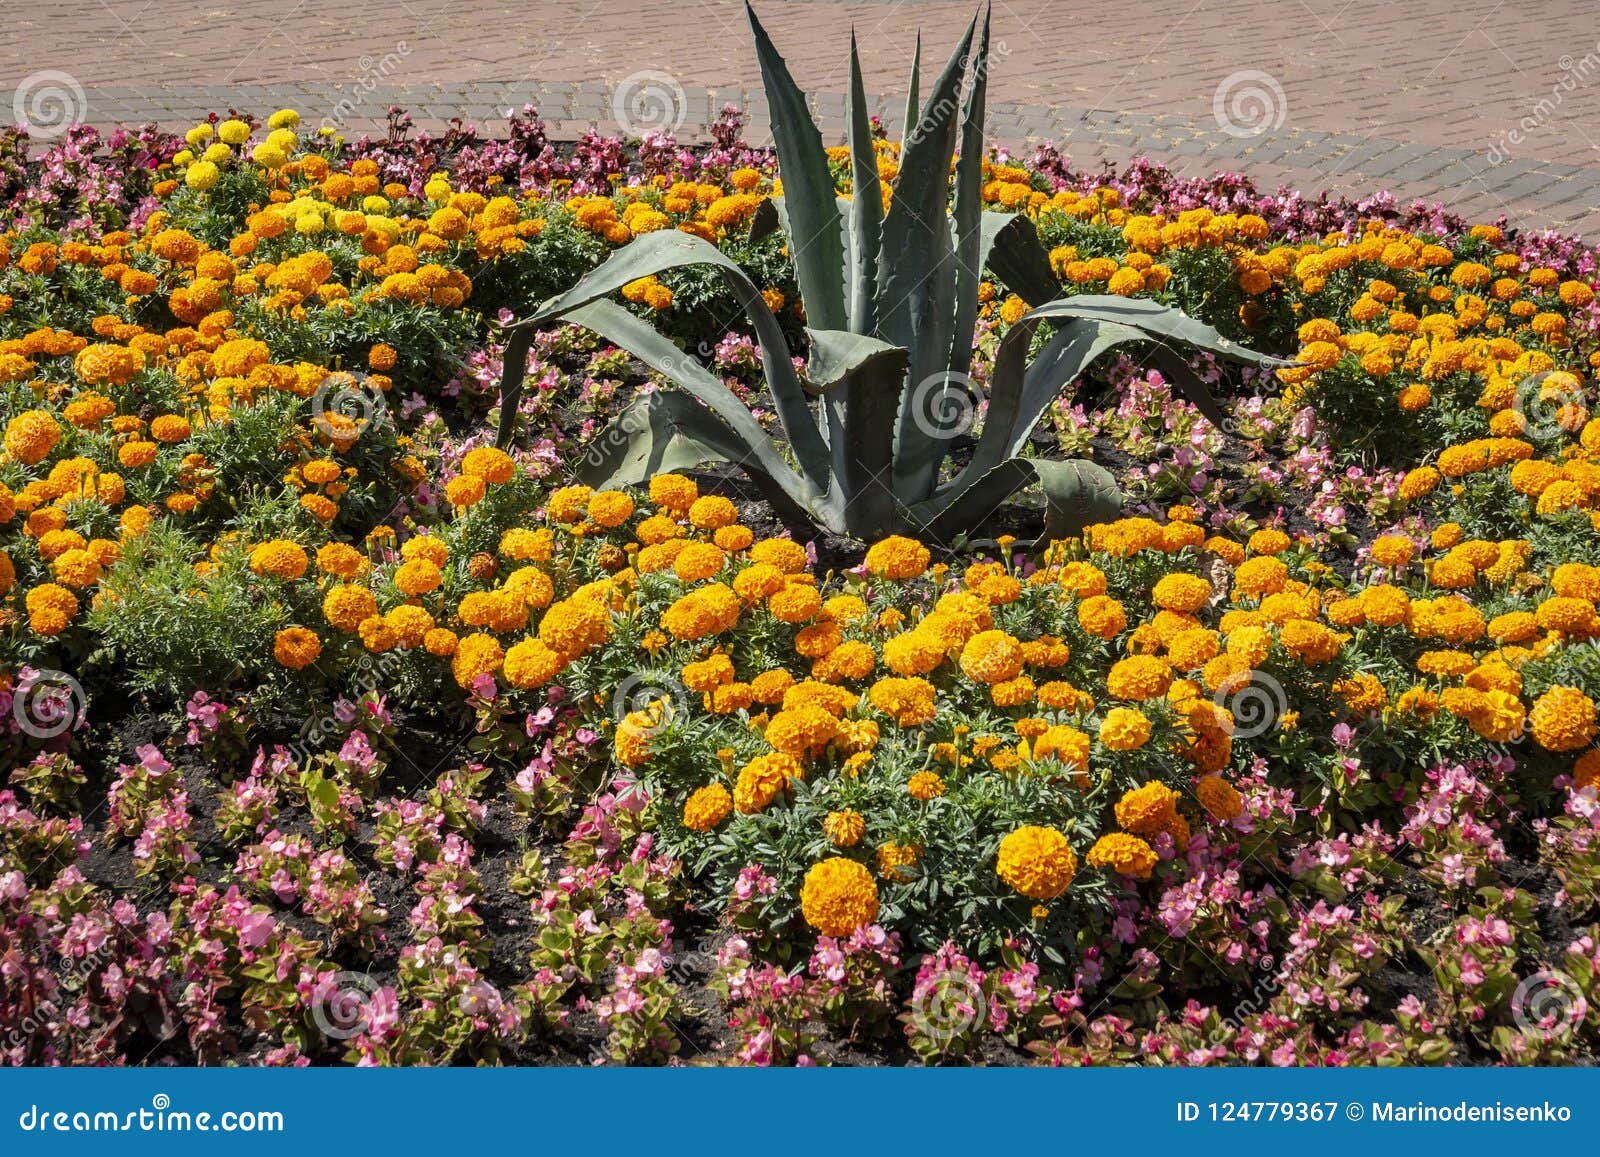 Summer Bright Flower Bed Of Yellow And Orange Marigold Flowers Tagetes Erecta Mexican Aztec Or African Marigold With The Big A Stock Image Image Of Field Leaves 124779367